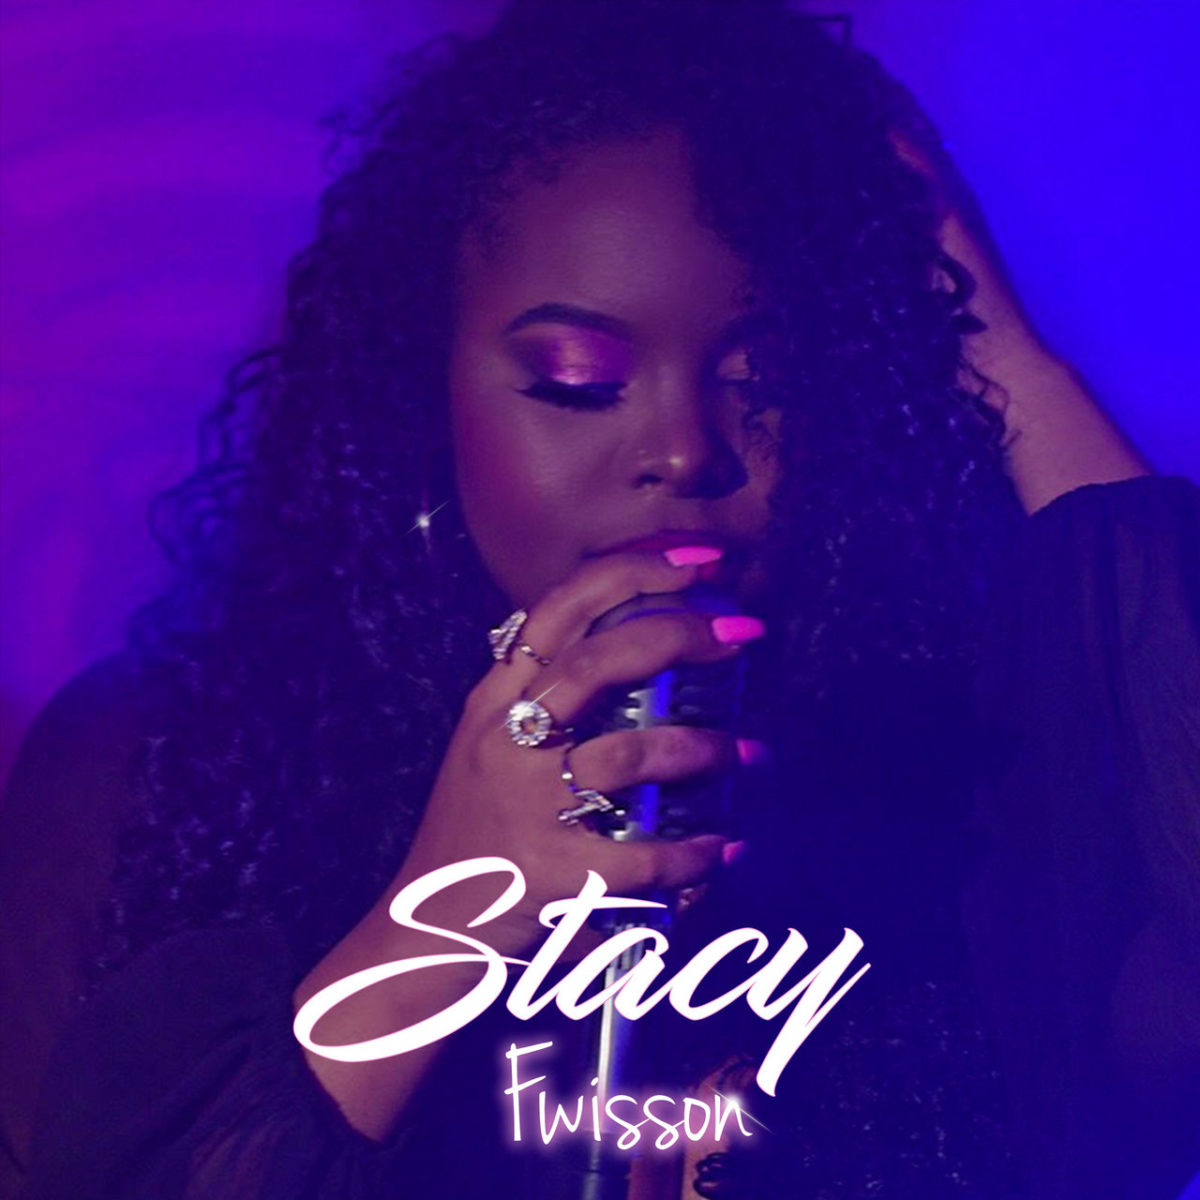 Stacy - Fwisson (Cover)